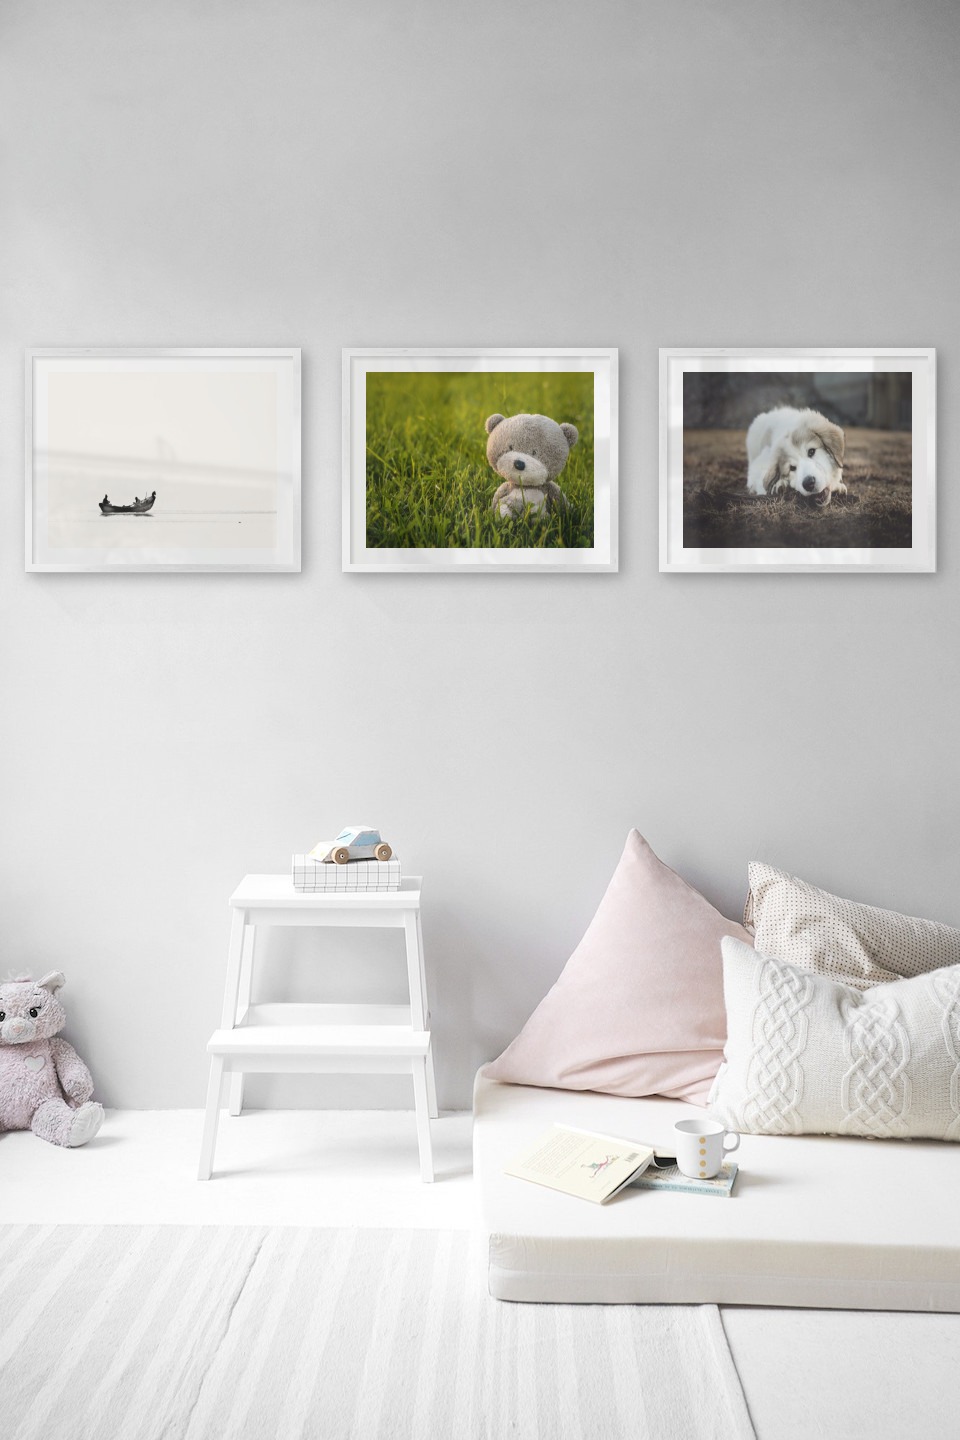 Gallery wall with picture frames in silver in sizes 40x50 with prints "People in boat", "Teddy bear in a field" and "Dog chewing"